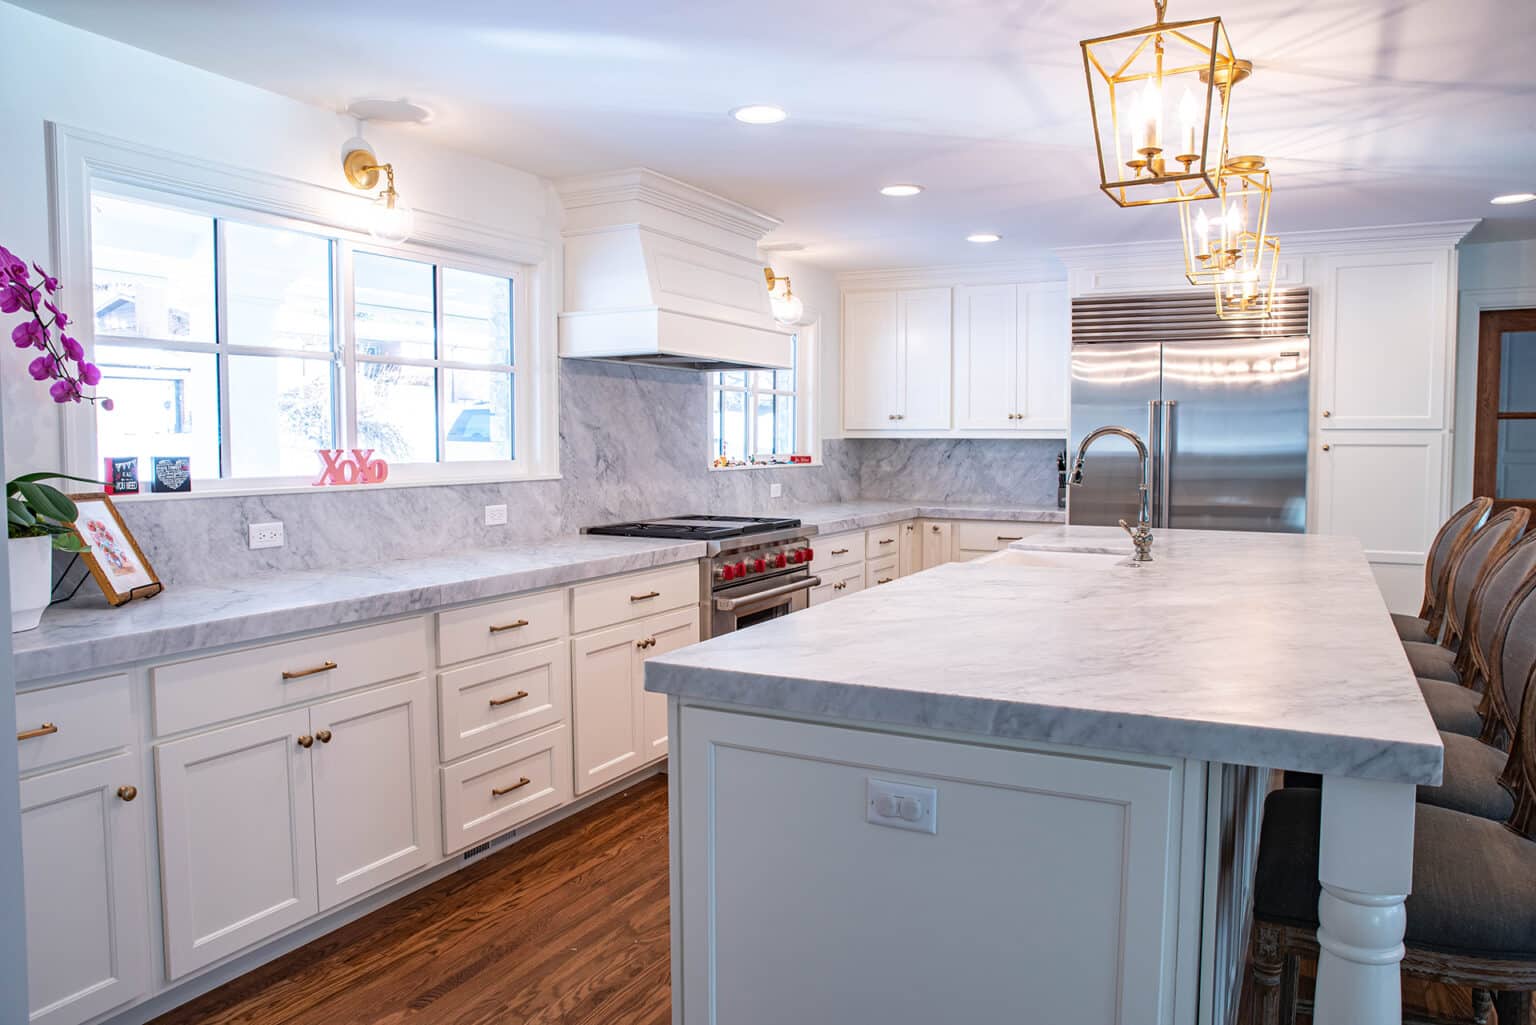 Kitchen Cabinets and Countertops – Salt Lake City, UT %% | Out Of The